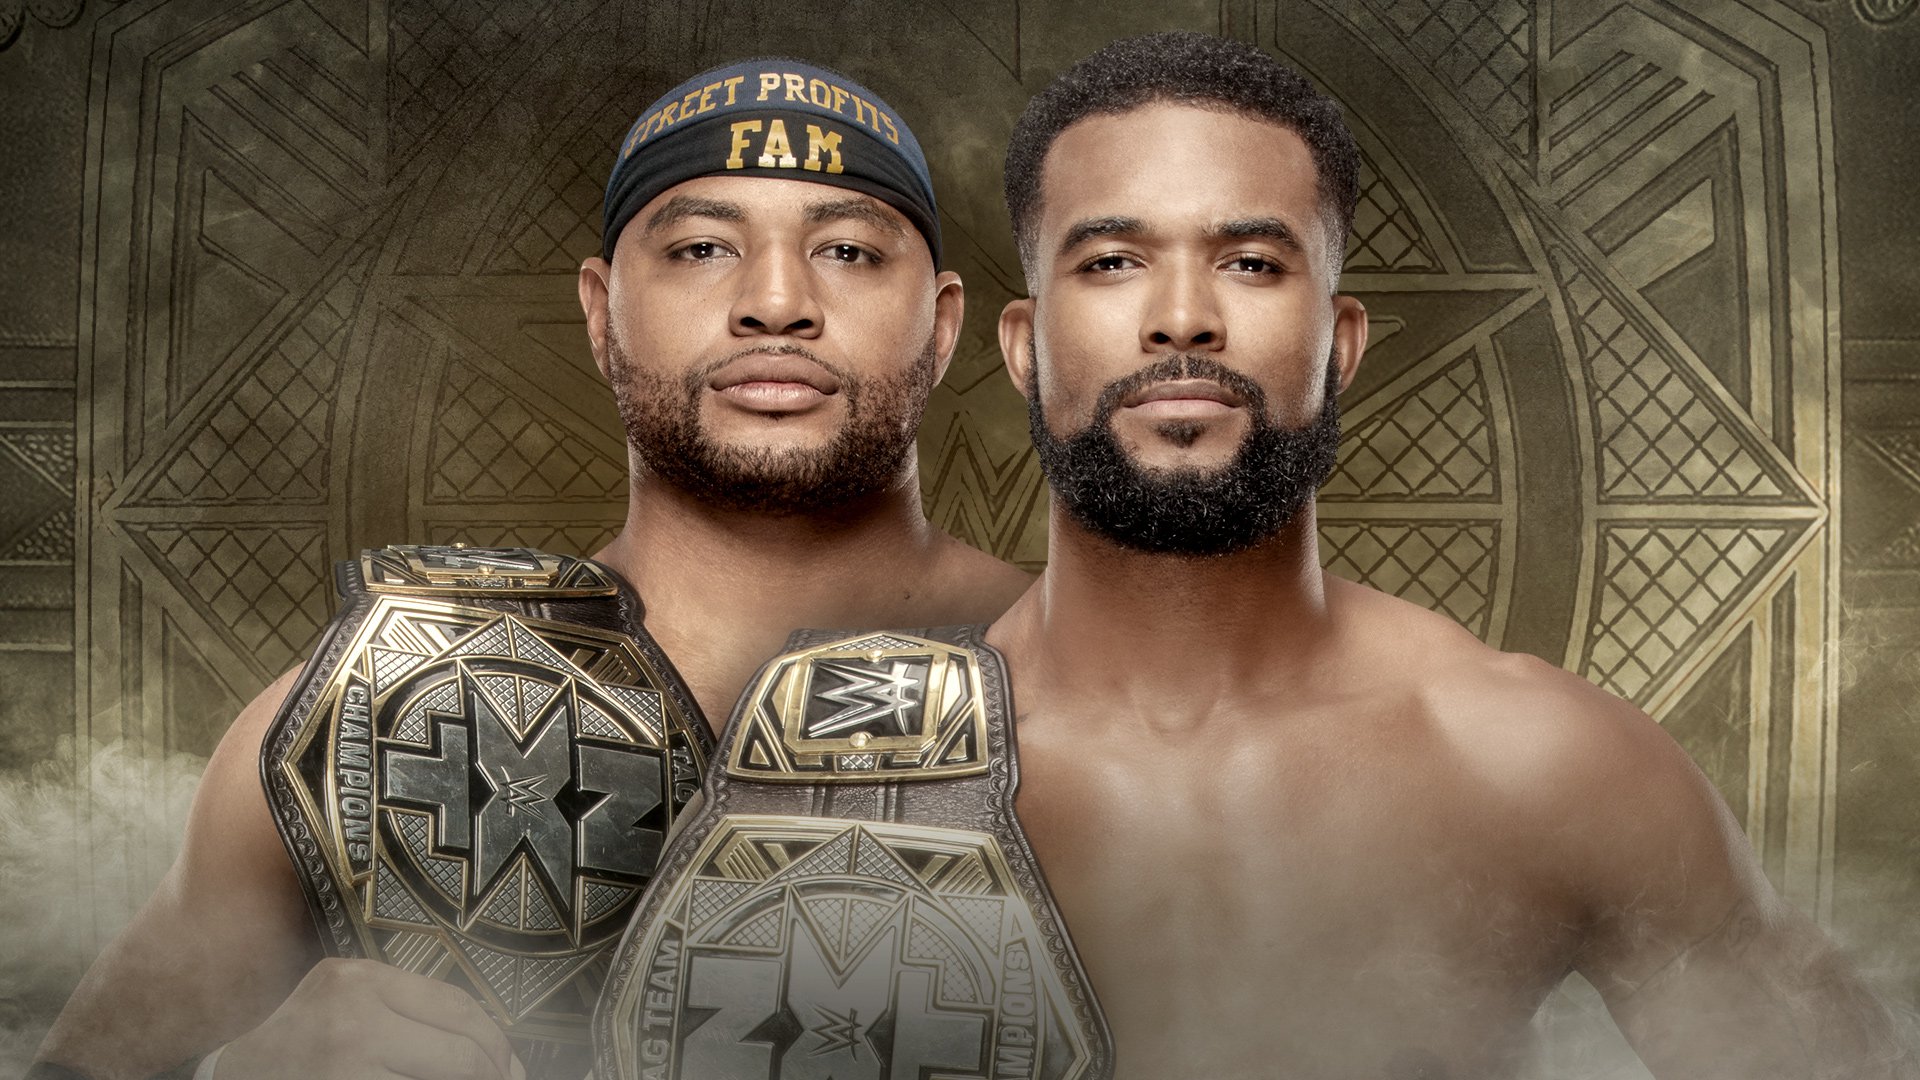 Exclusive Q&A: Street Profits reflect on their championship triumph, look to the future